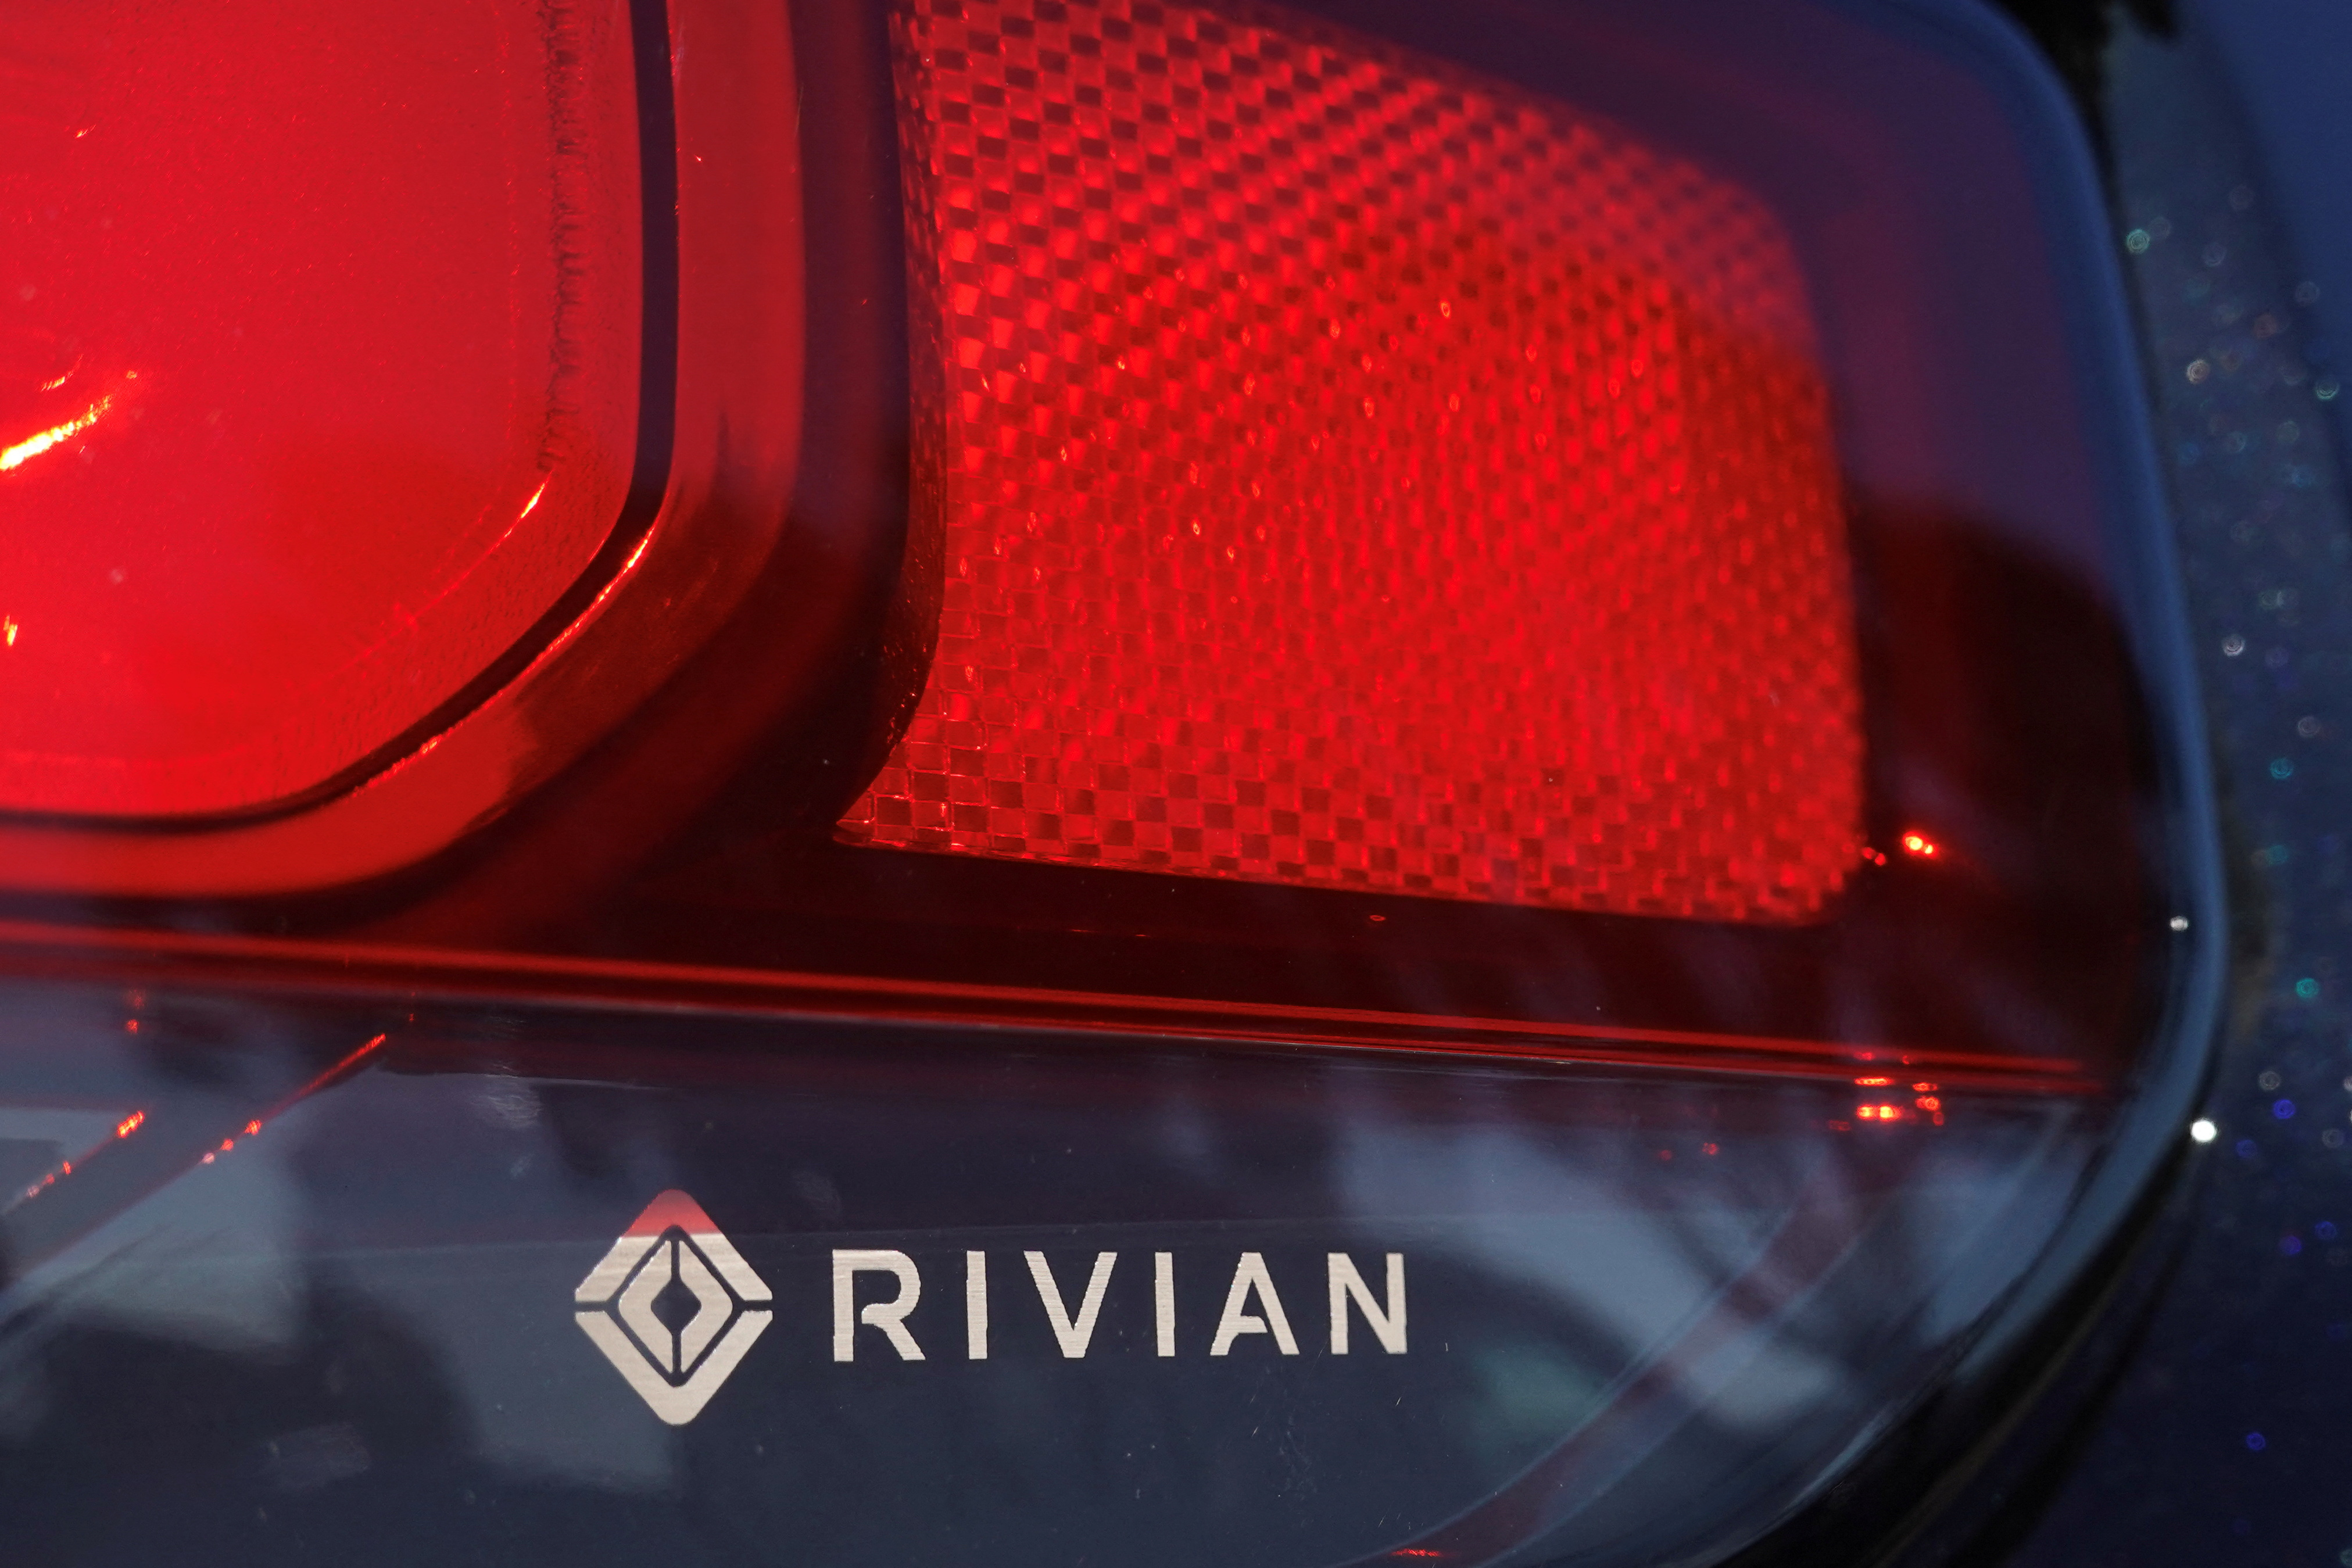 The Rivian name and logo are shown on one of their new electic SUV vehicles in California